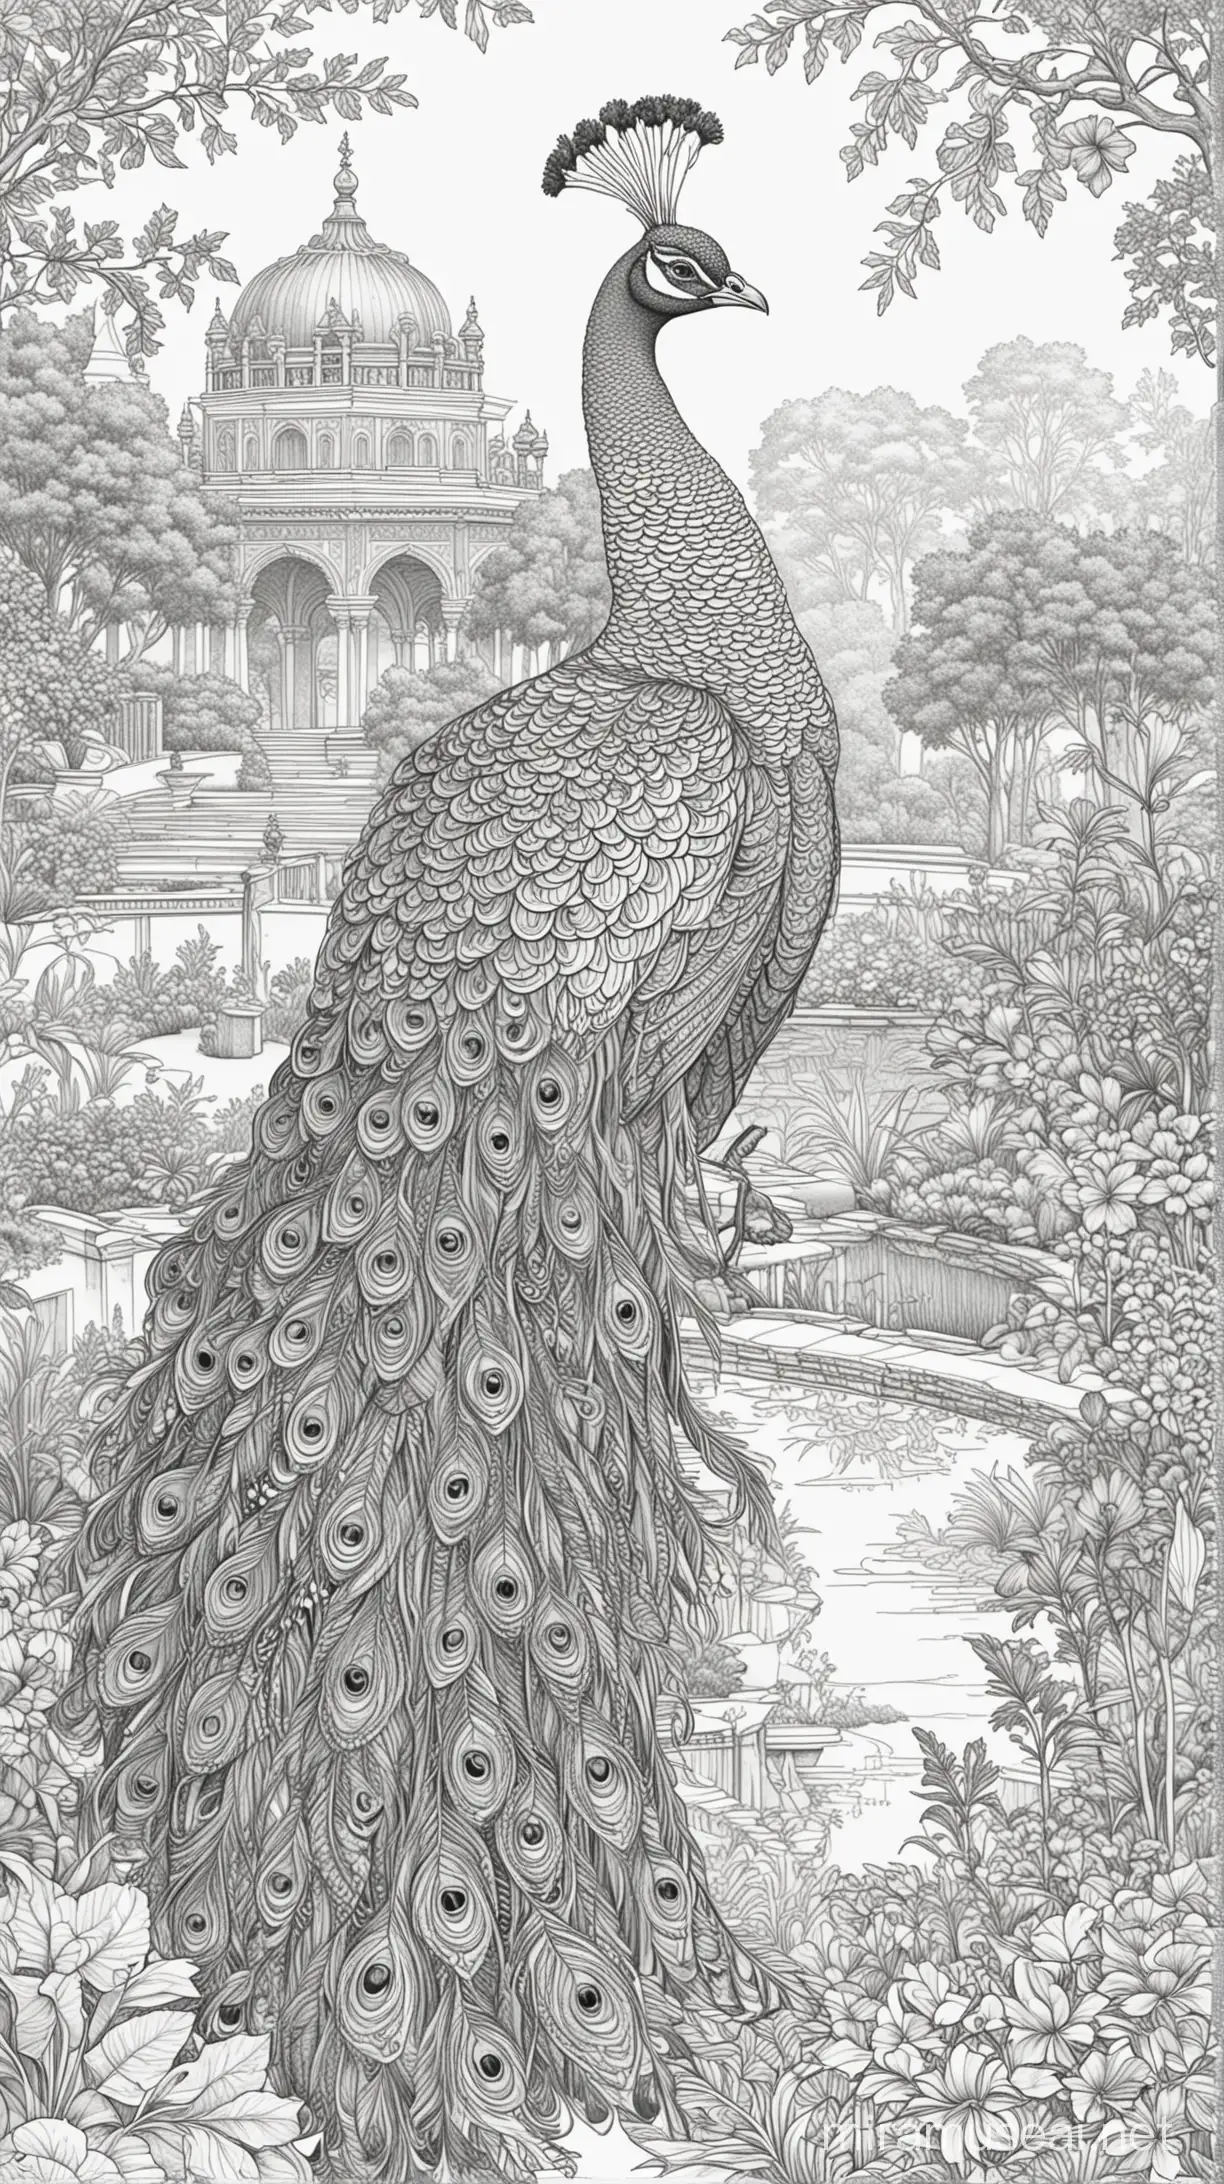 Peacock and palace garden for adult coloring book,b&w, realistic, neat, no dark parts, turn all dark part to white, complex, symmetrical, drawing, sketch, clear lines